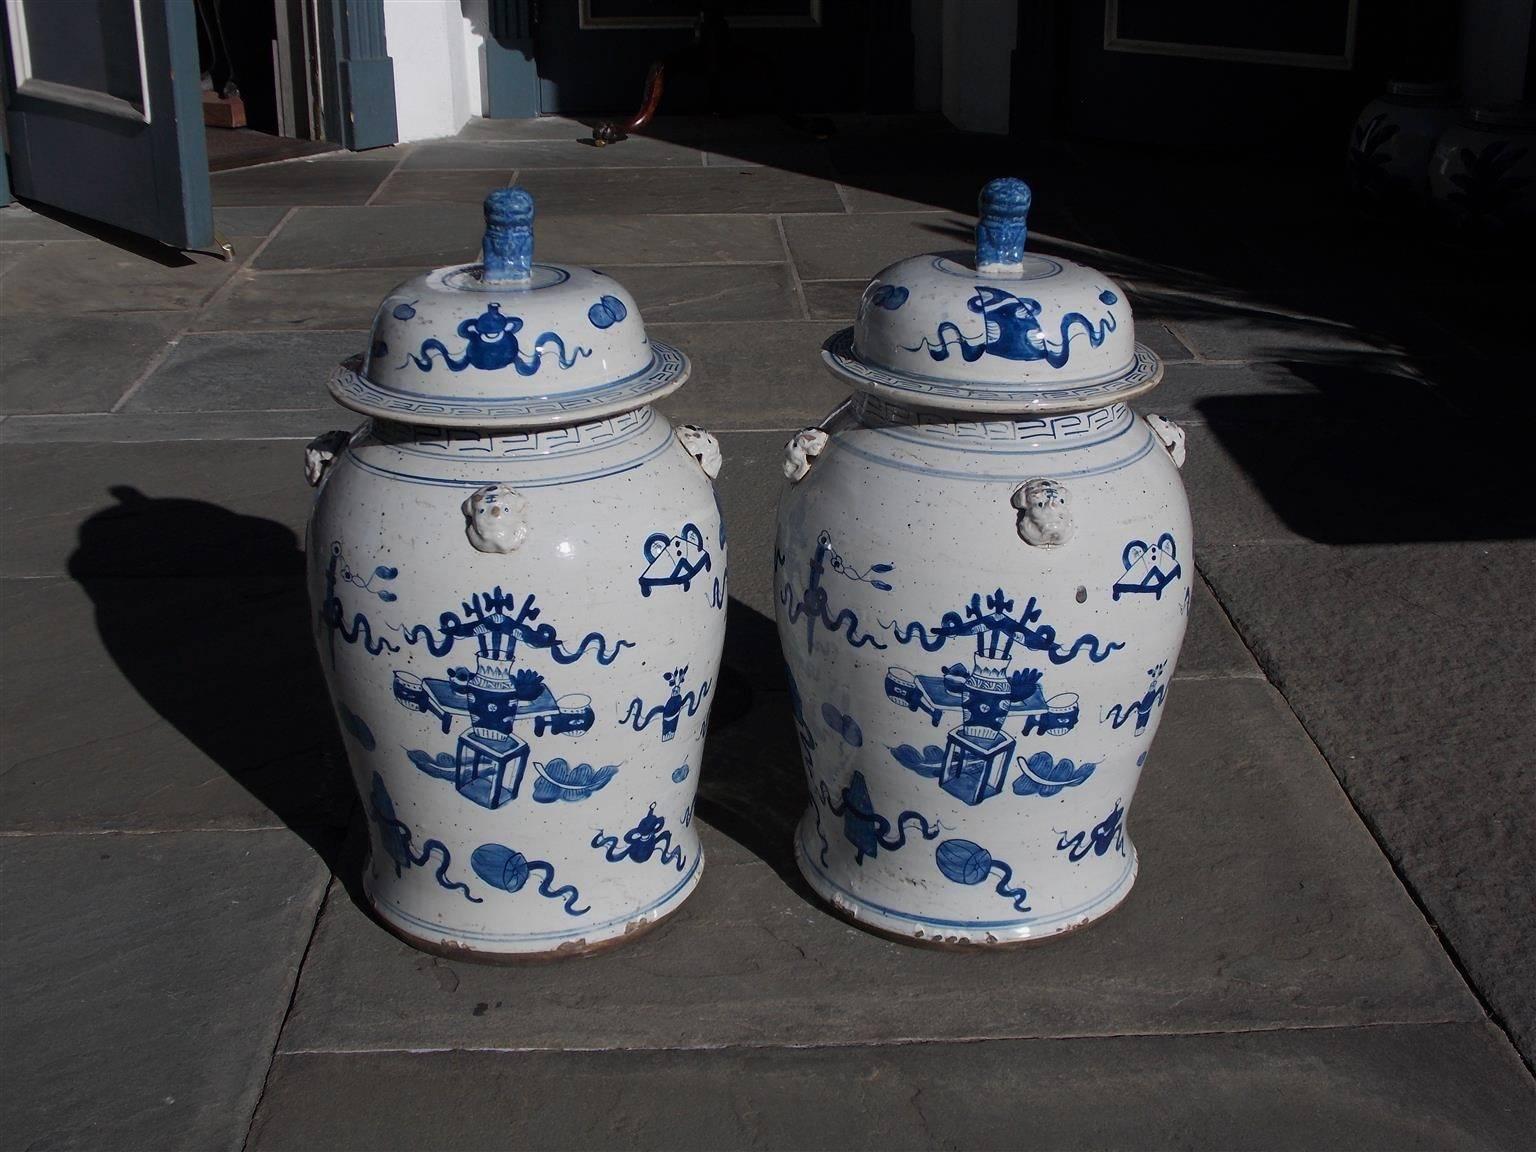 Pair of Chinese porcelain glazed blue and white temple jars with flaking foo dogs finials, decorative painted borders, surrounding figural faces, and centered painted vases with floral motif.  Lids are removable and were used to store perishable